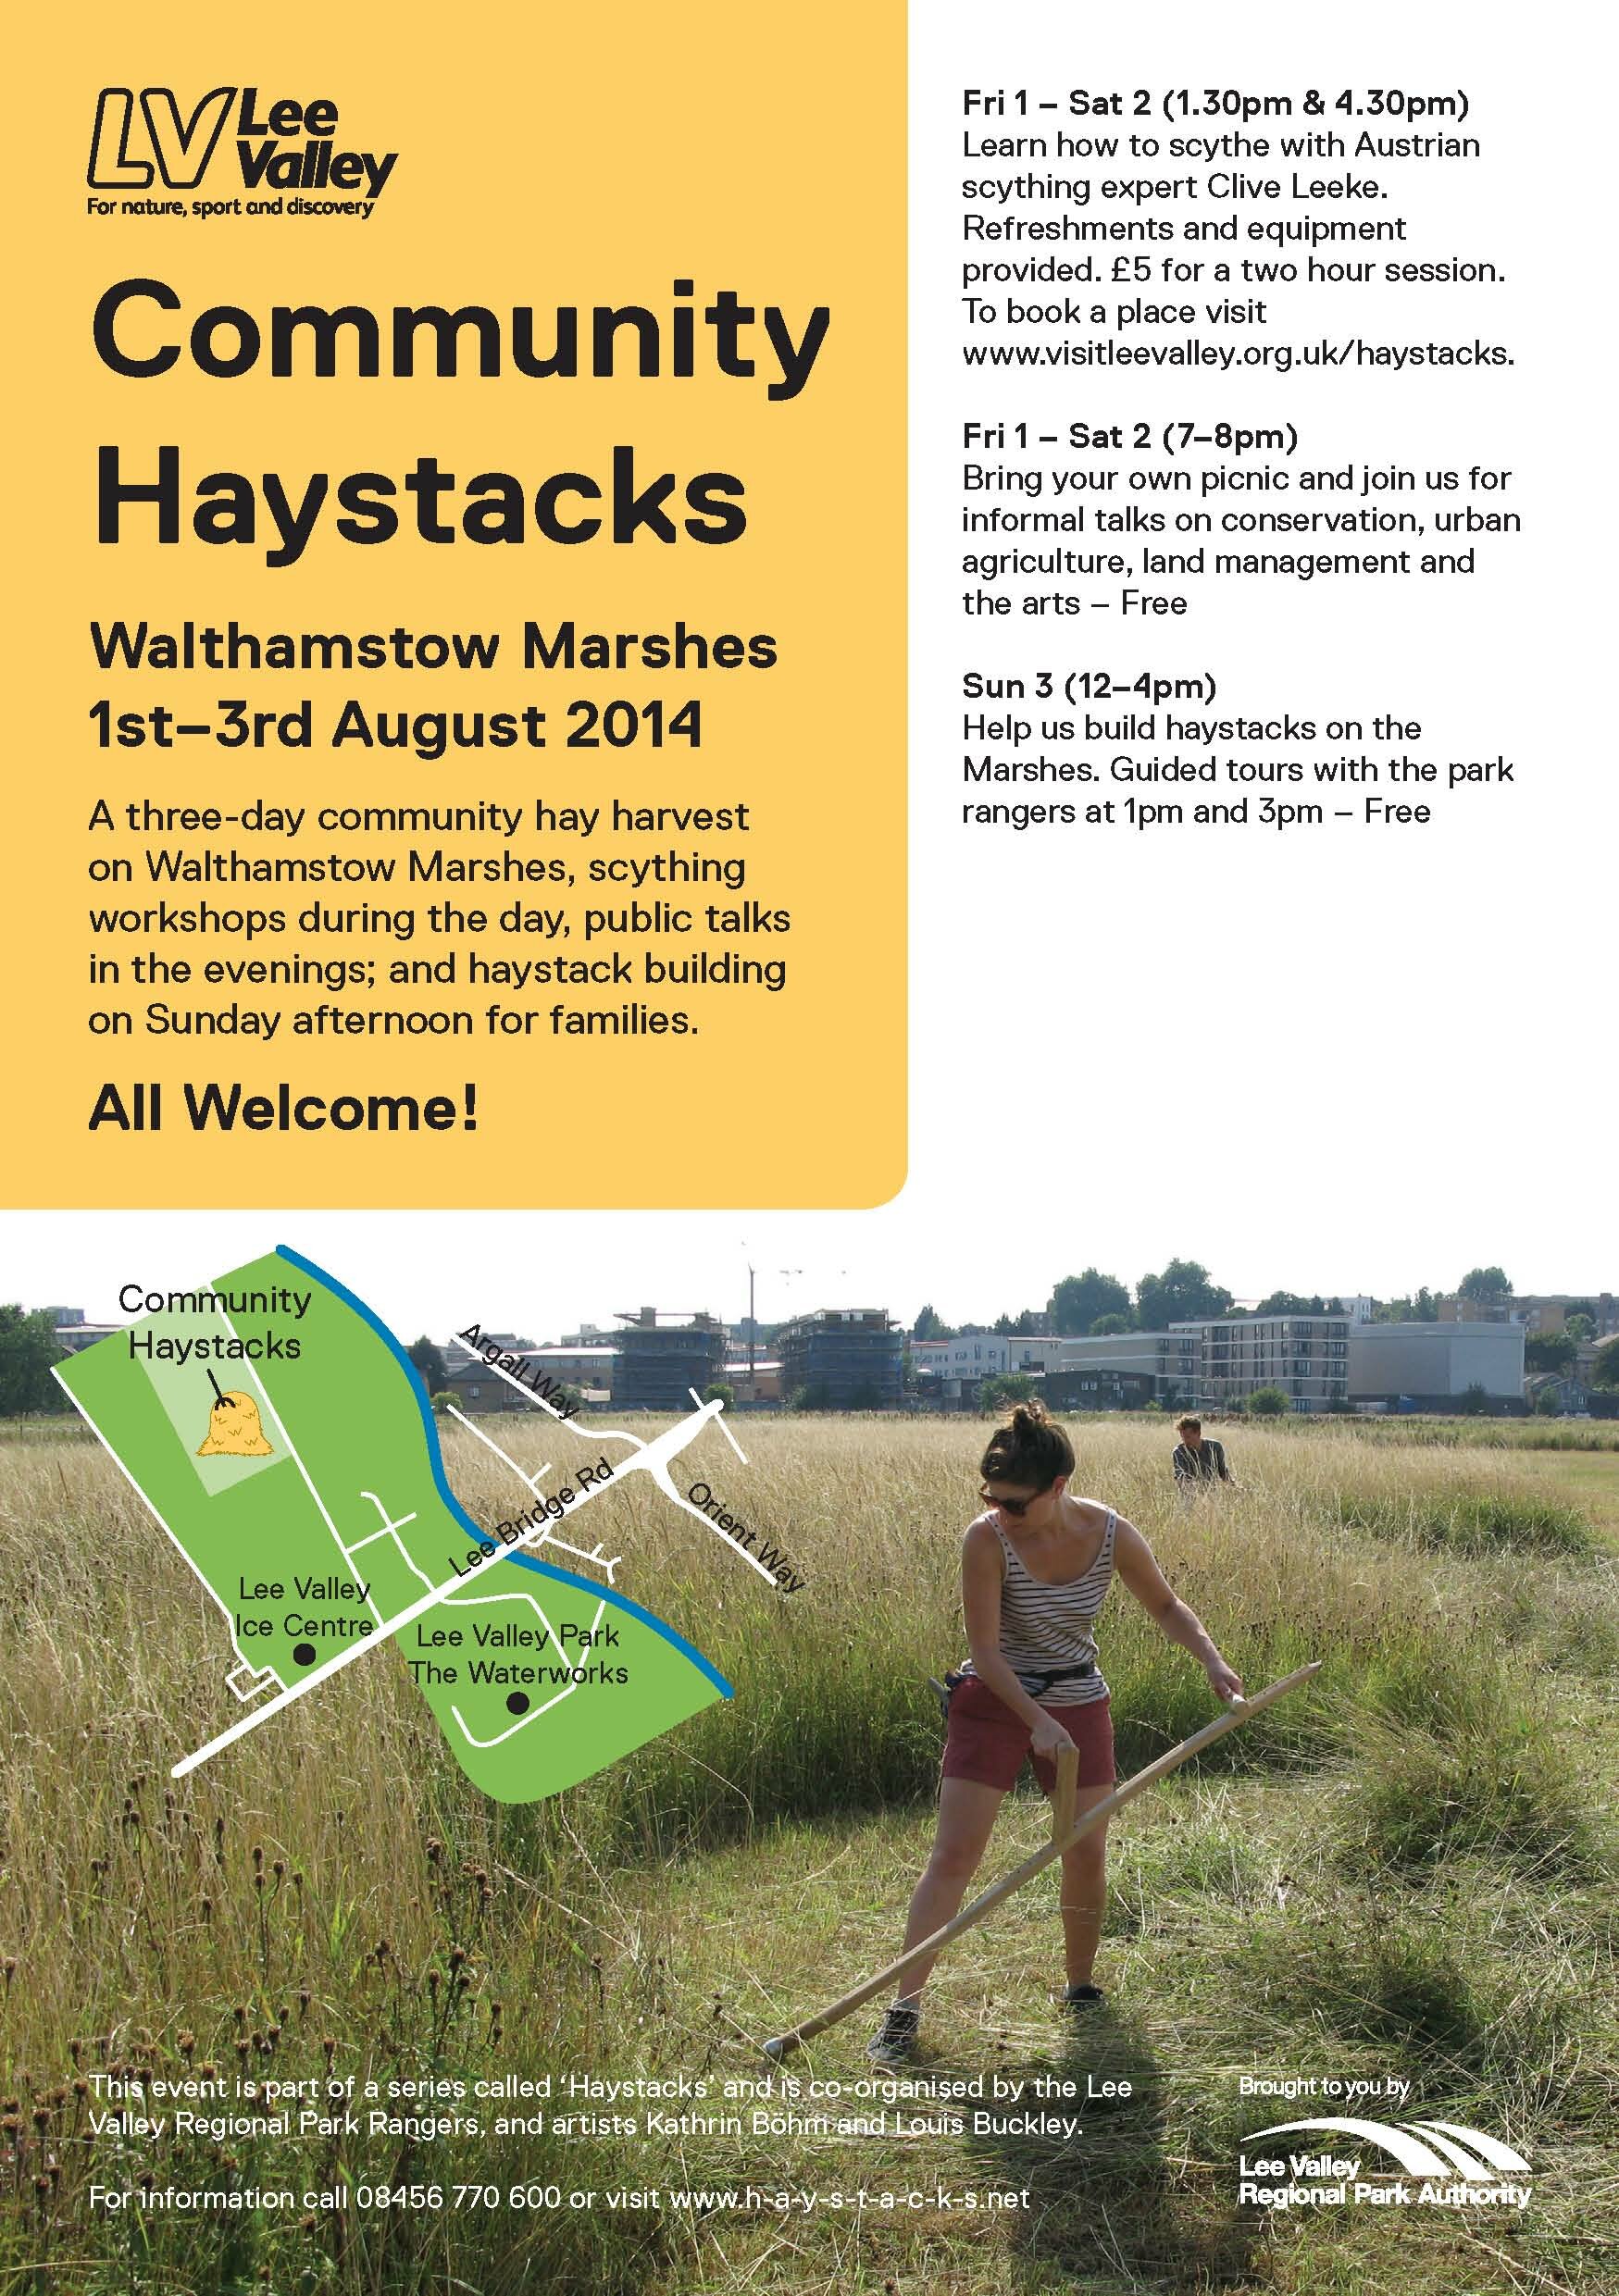 Community Haystack on the Walthamstow Marshes, 1-3 August 2014